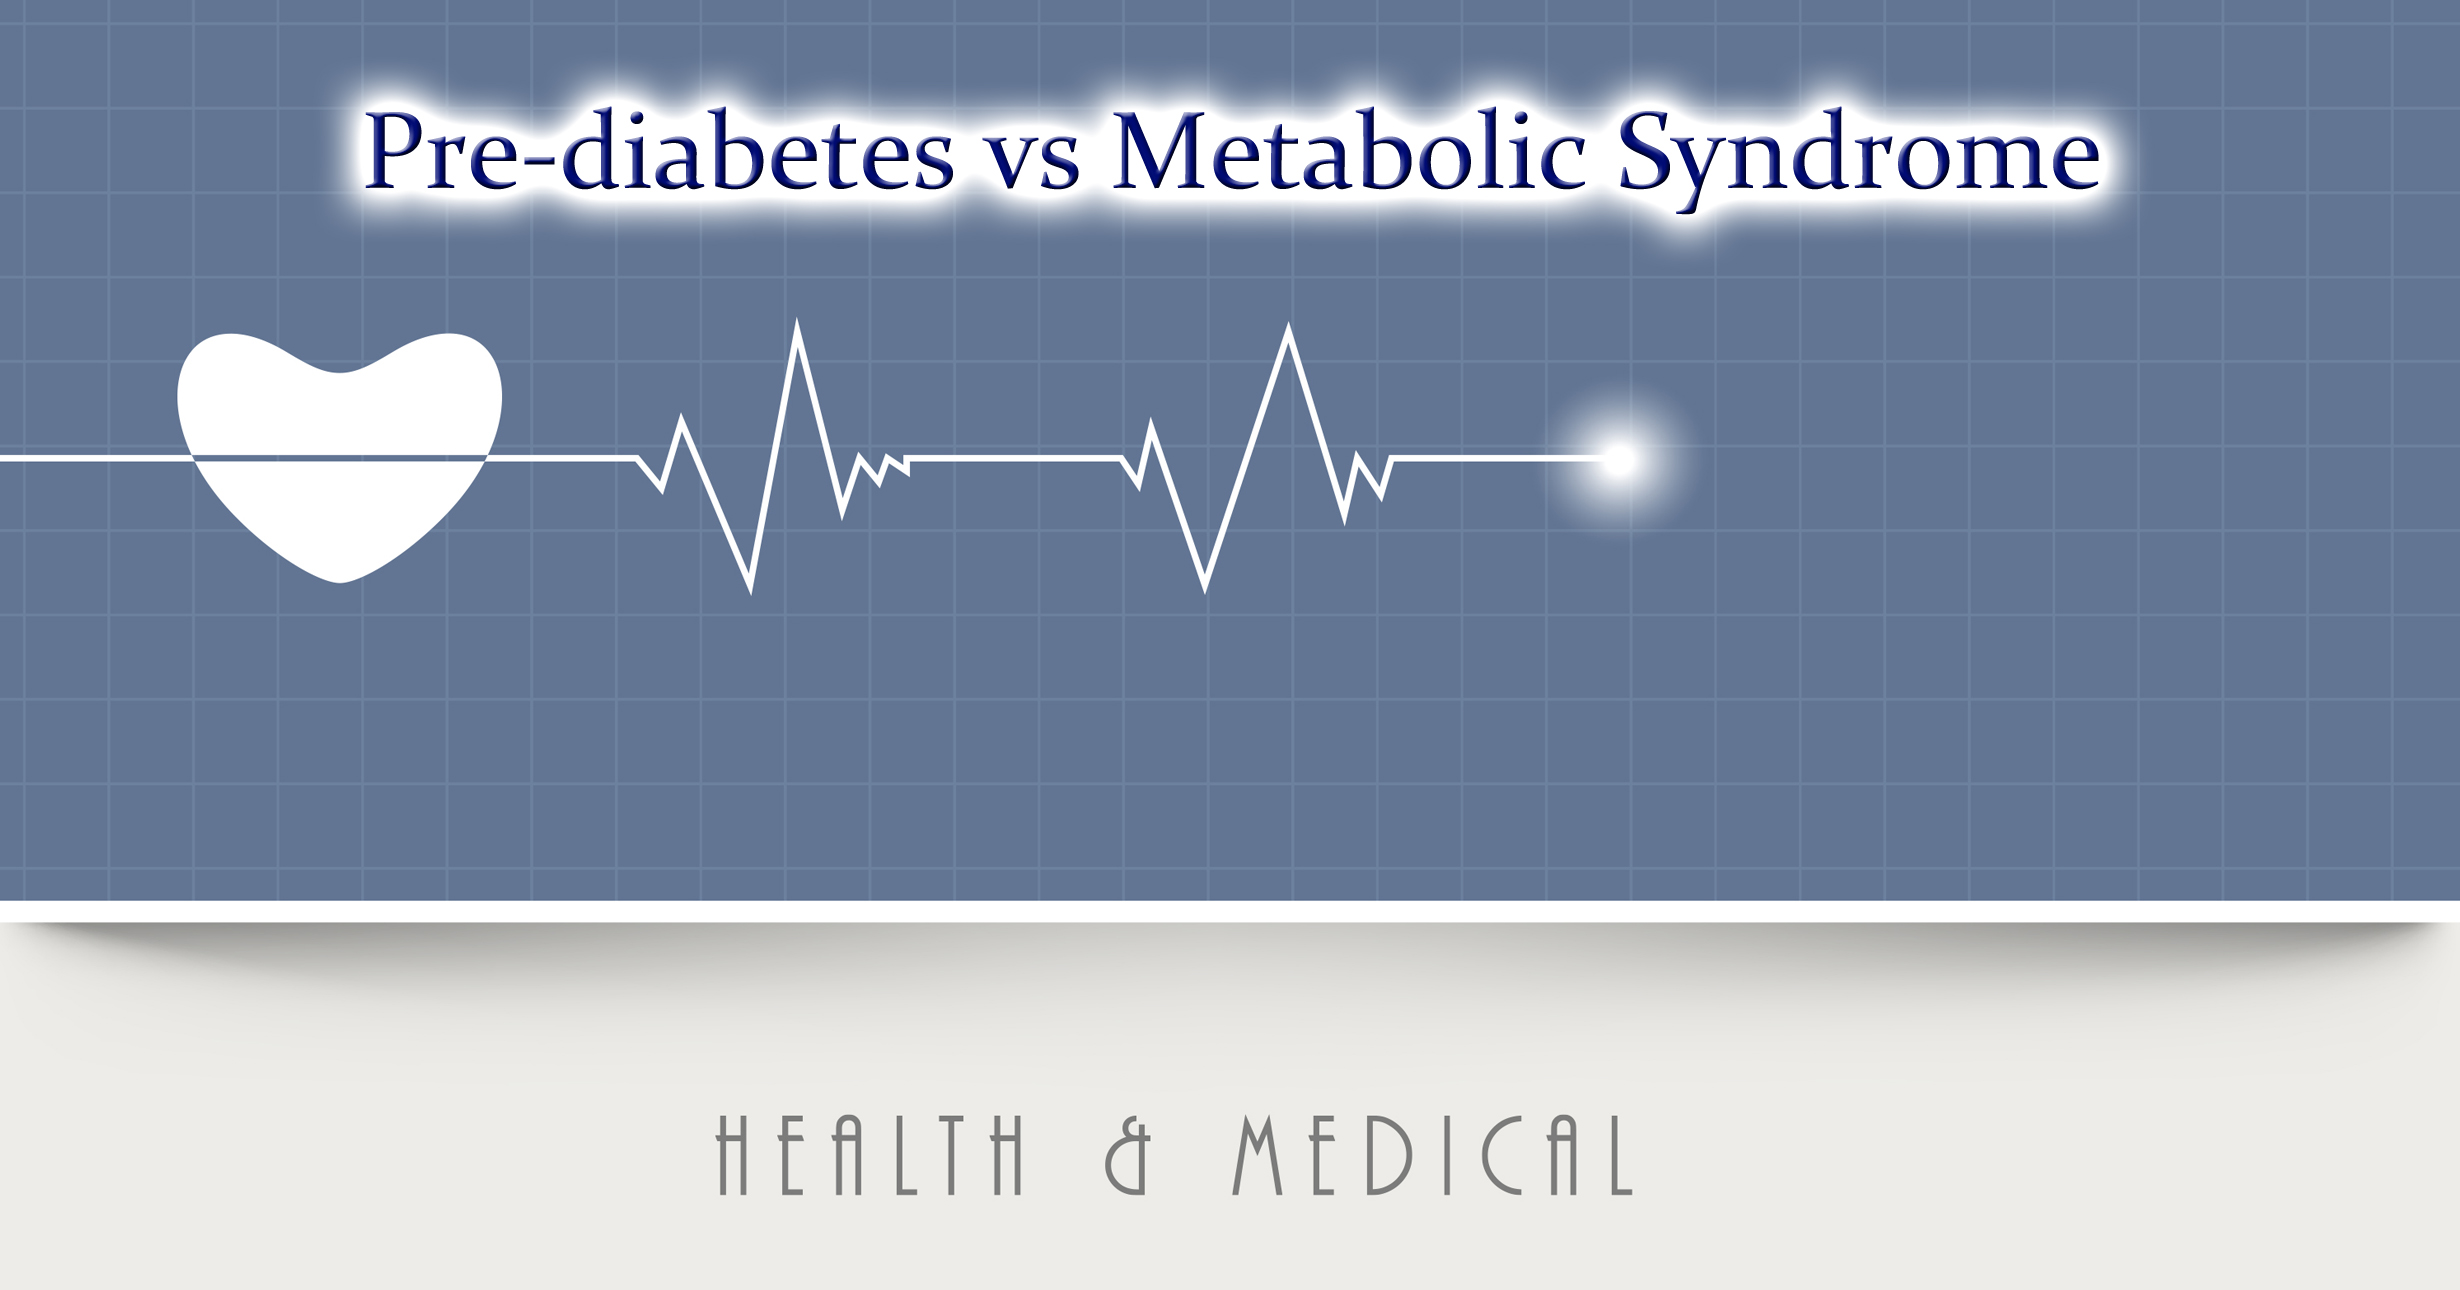 Pre-diabetes and Metabolic Syndrome are both serious conditions but are not the same thing.